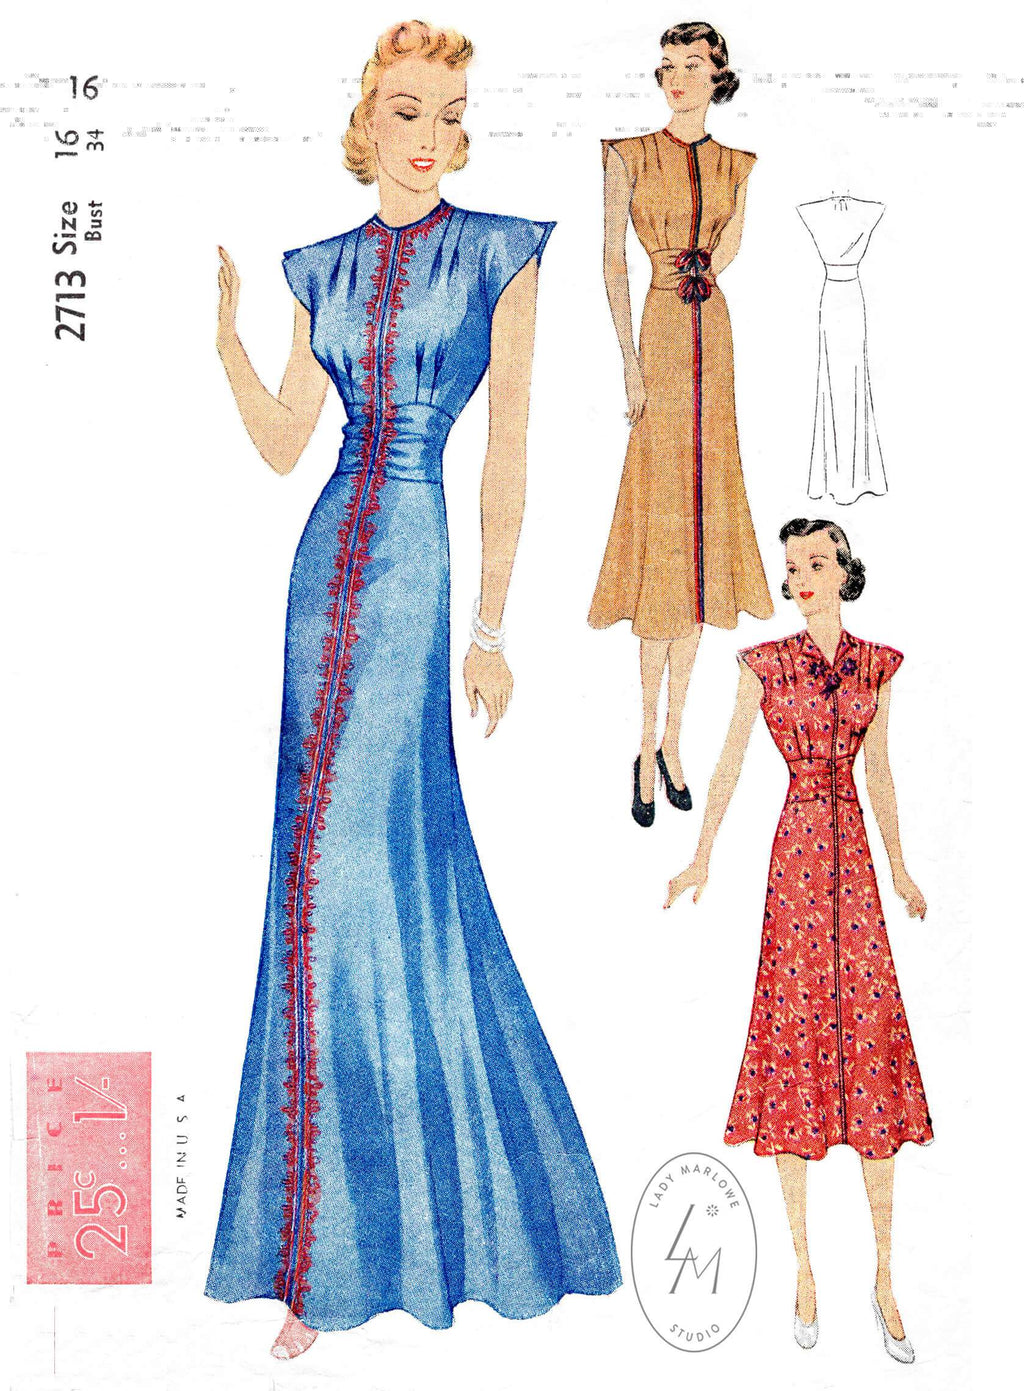 Simplicity 2713 1930s 30s day dress or evening dinner gown kimono cap sleeves braid trim reproduction sewing pattern